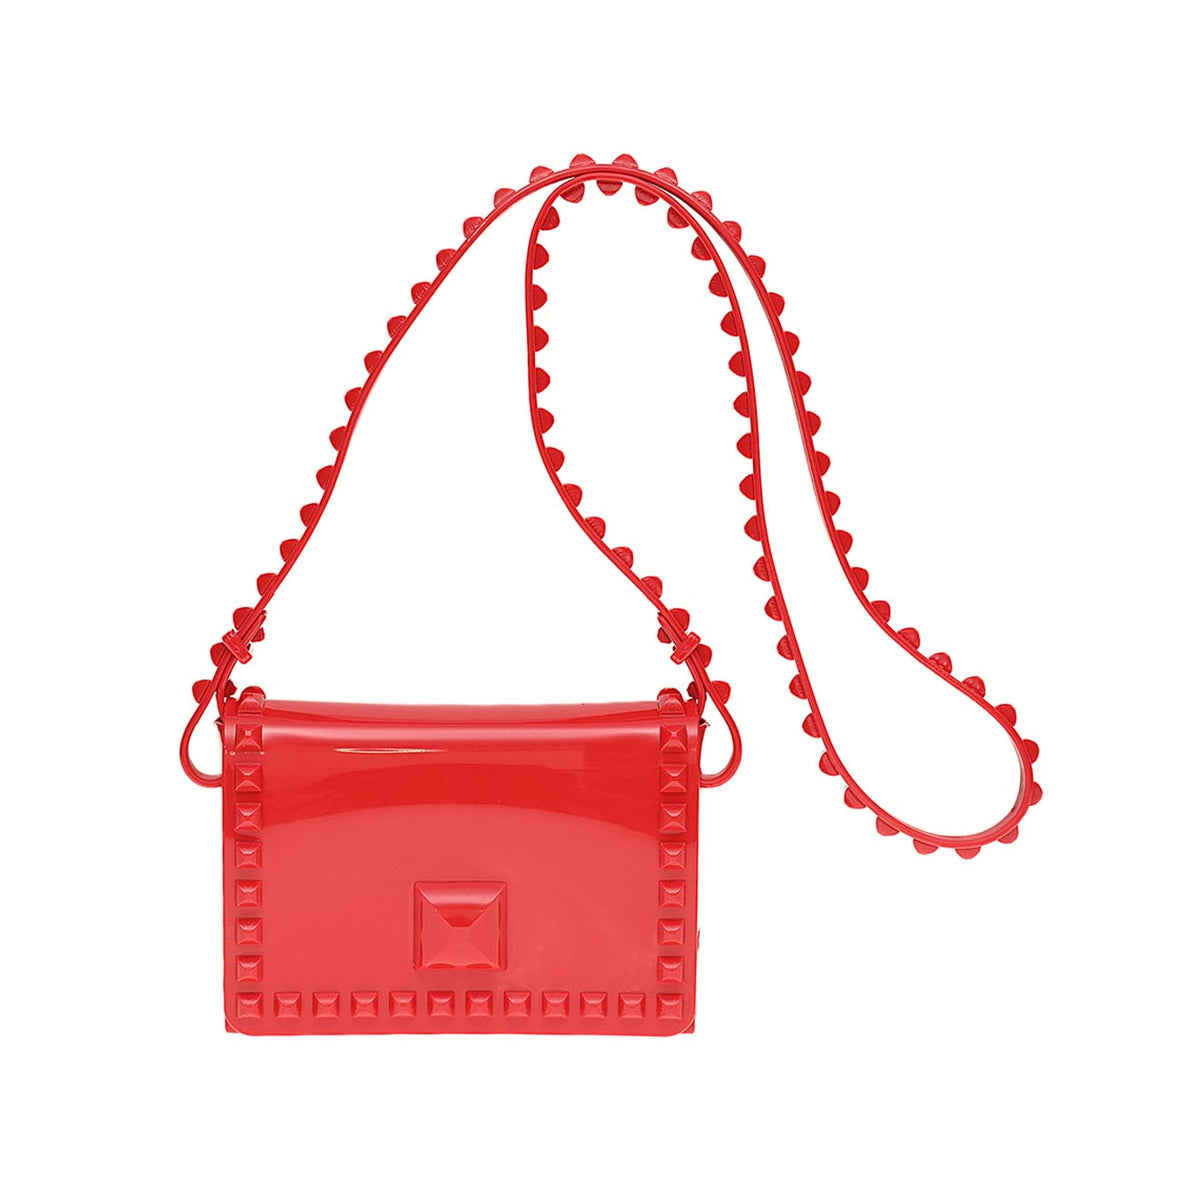 Minicarmensol Red mini shoulder bag for kids made in Italy waterproof.